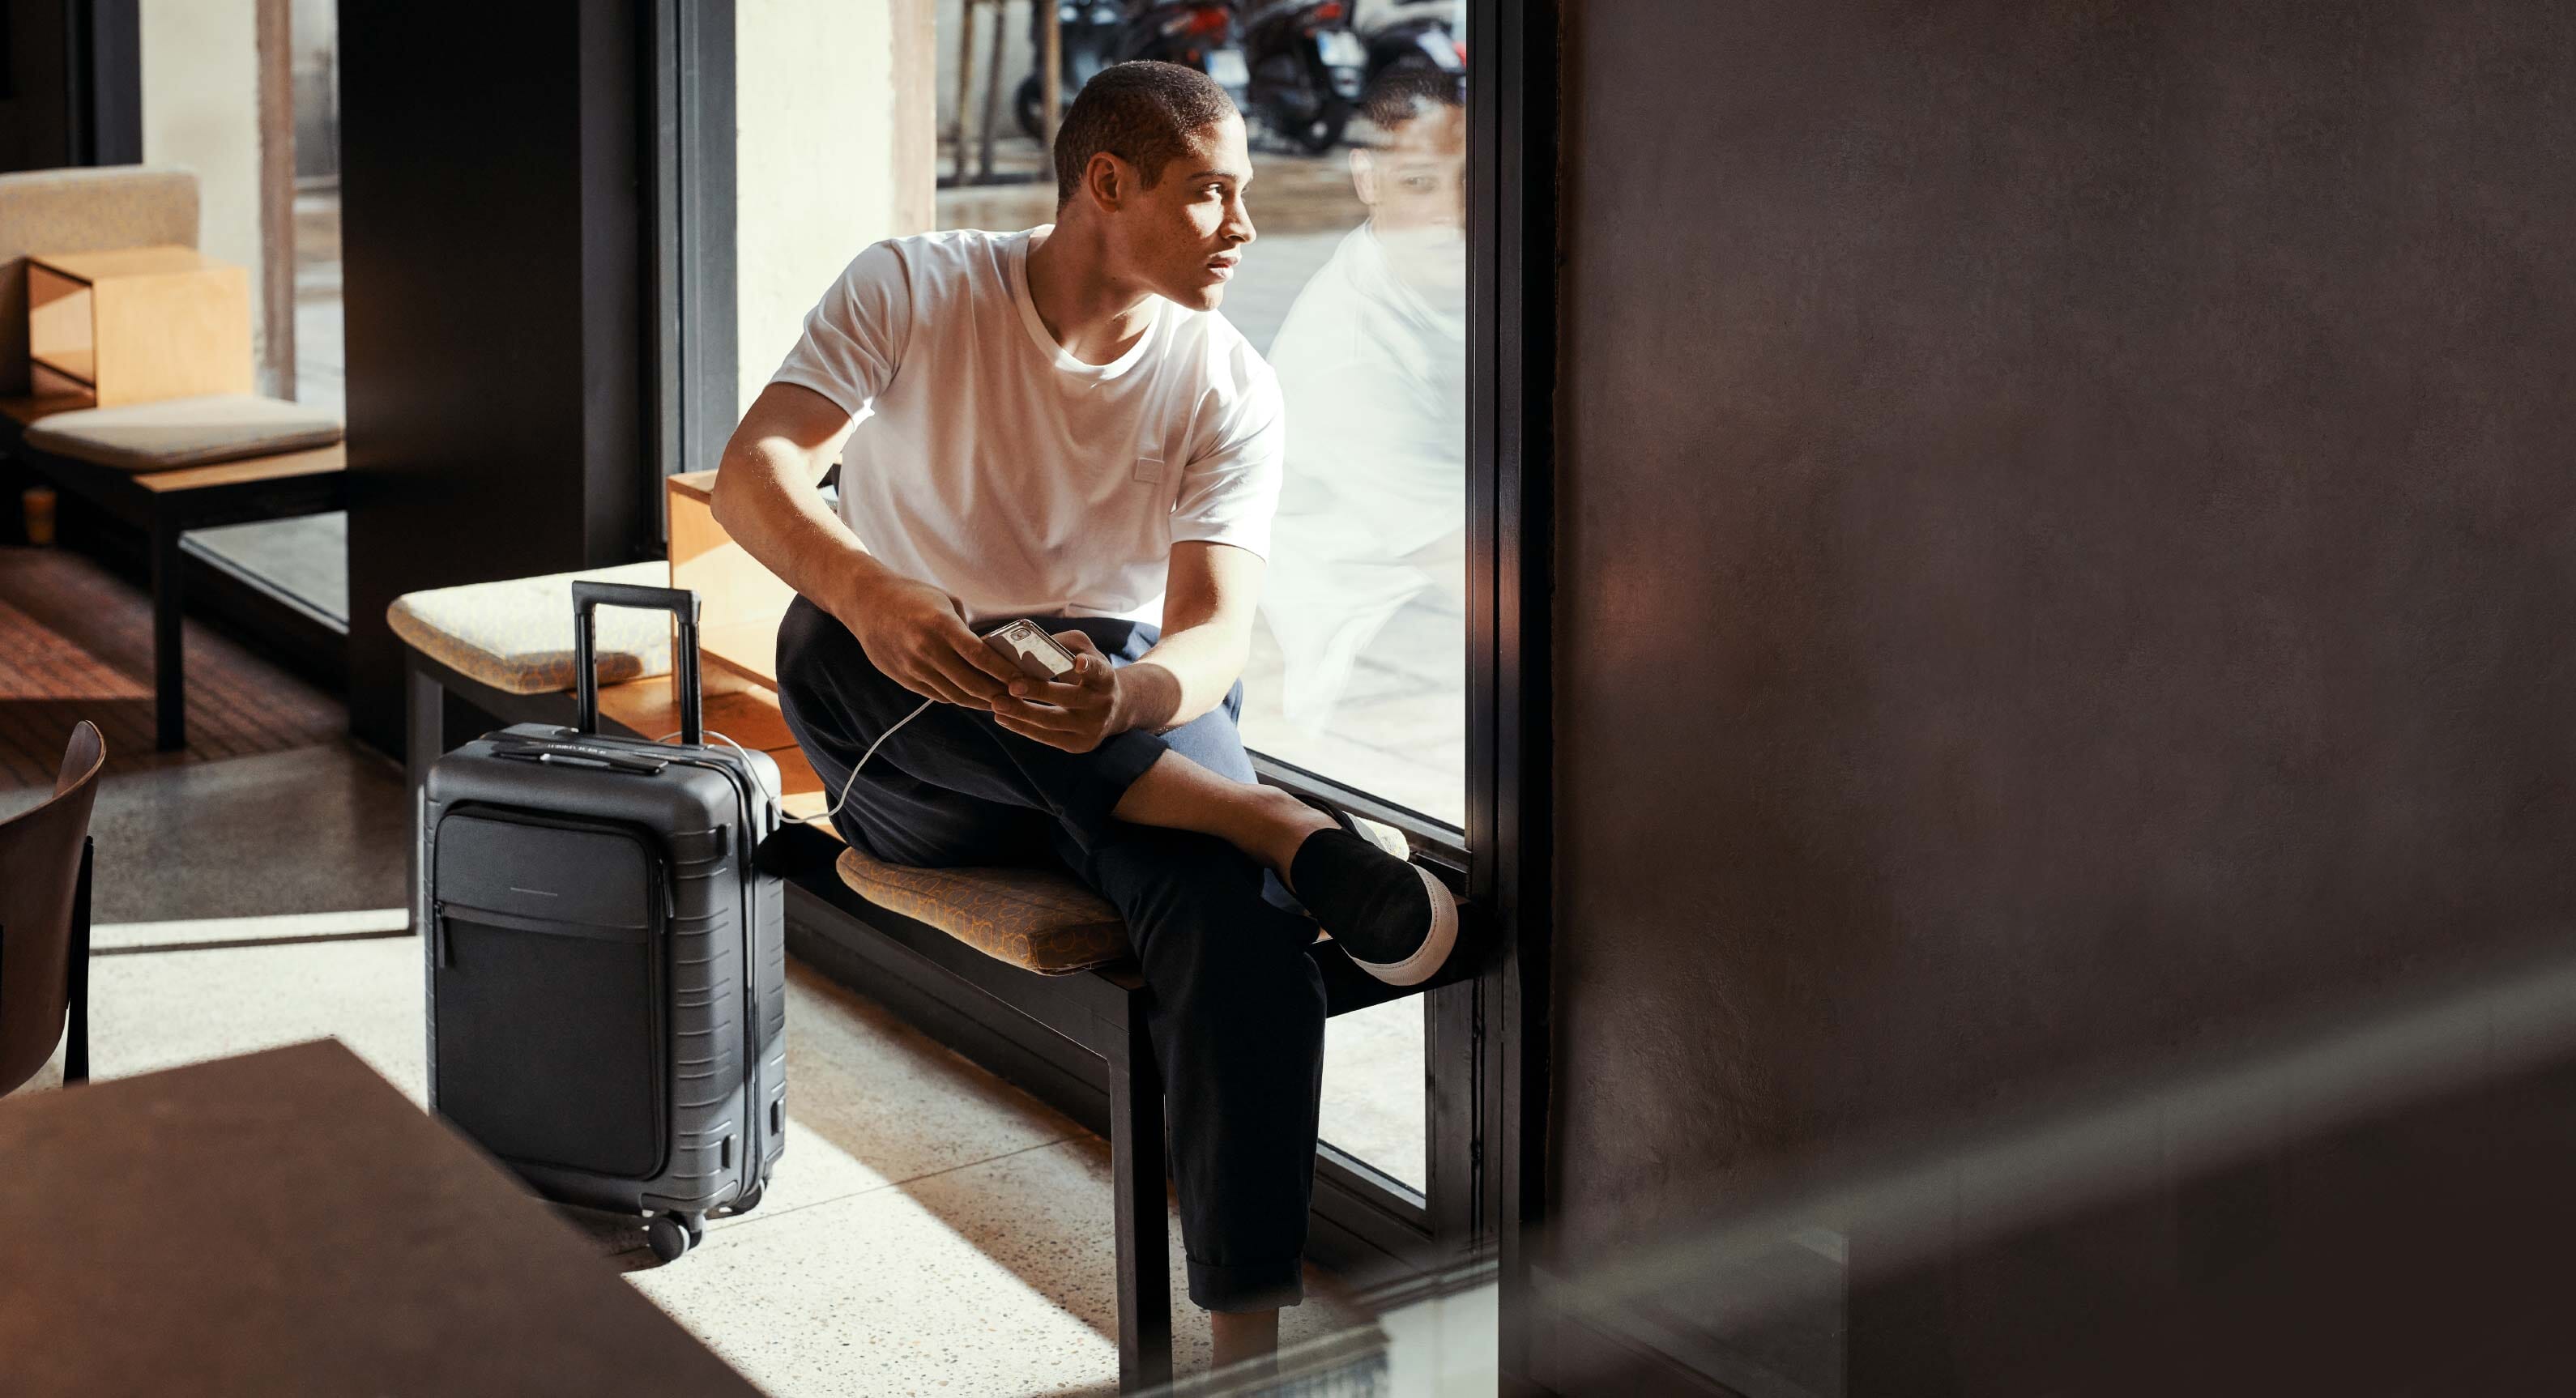 Horizn Studios' Smart Luggage Is 15% Off With This Promo Code